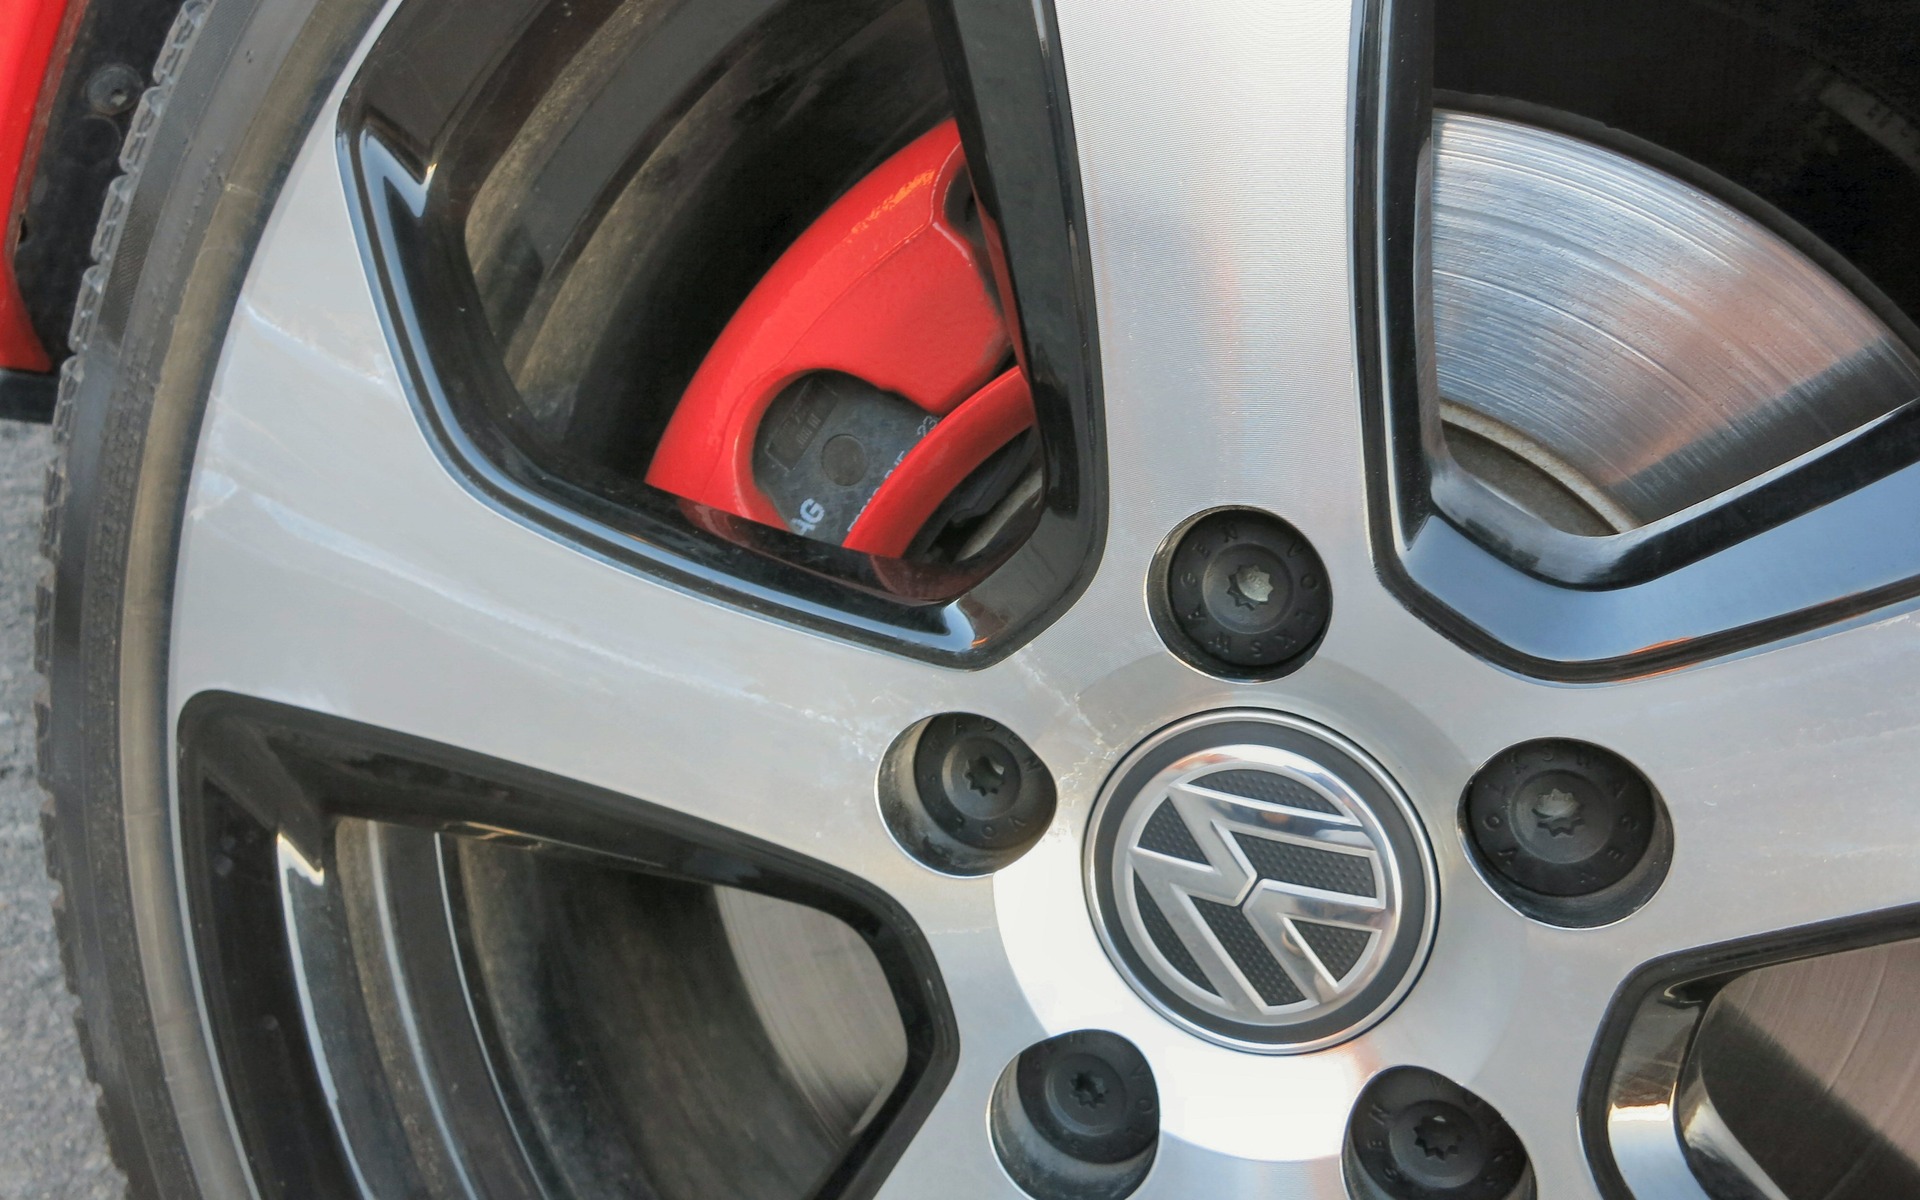 Red calipers are a nice touch with the 2015 Volkswagen Golf GTI.